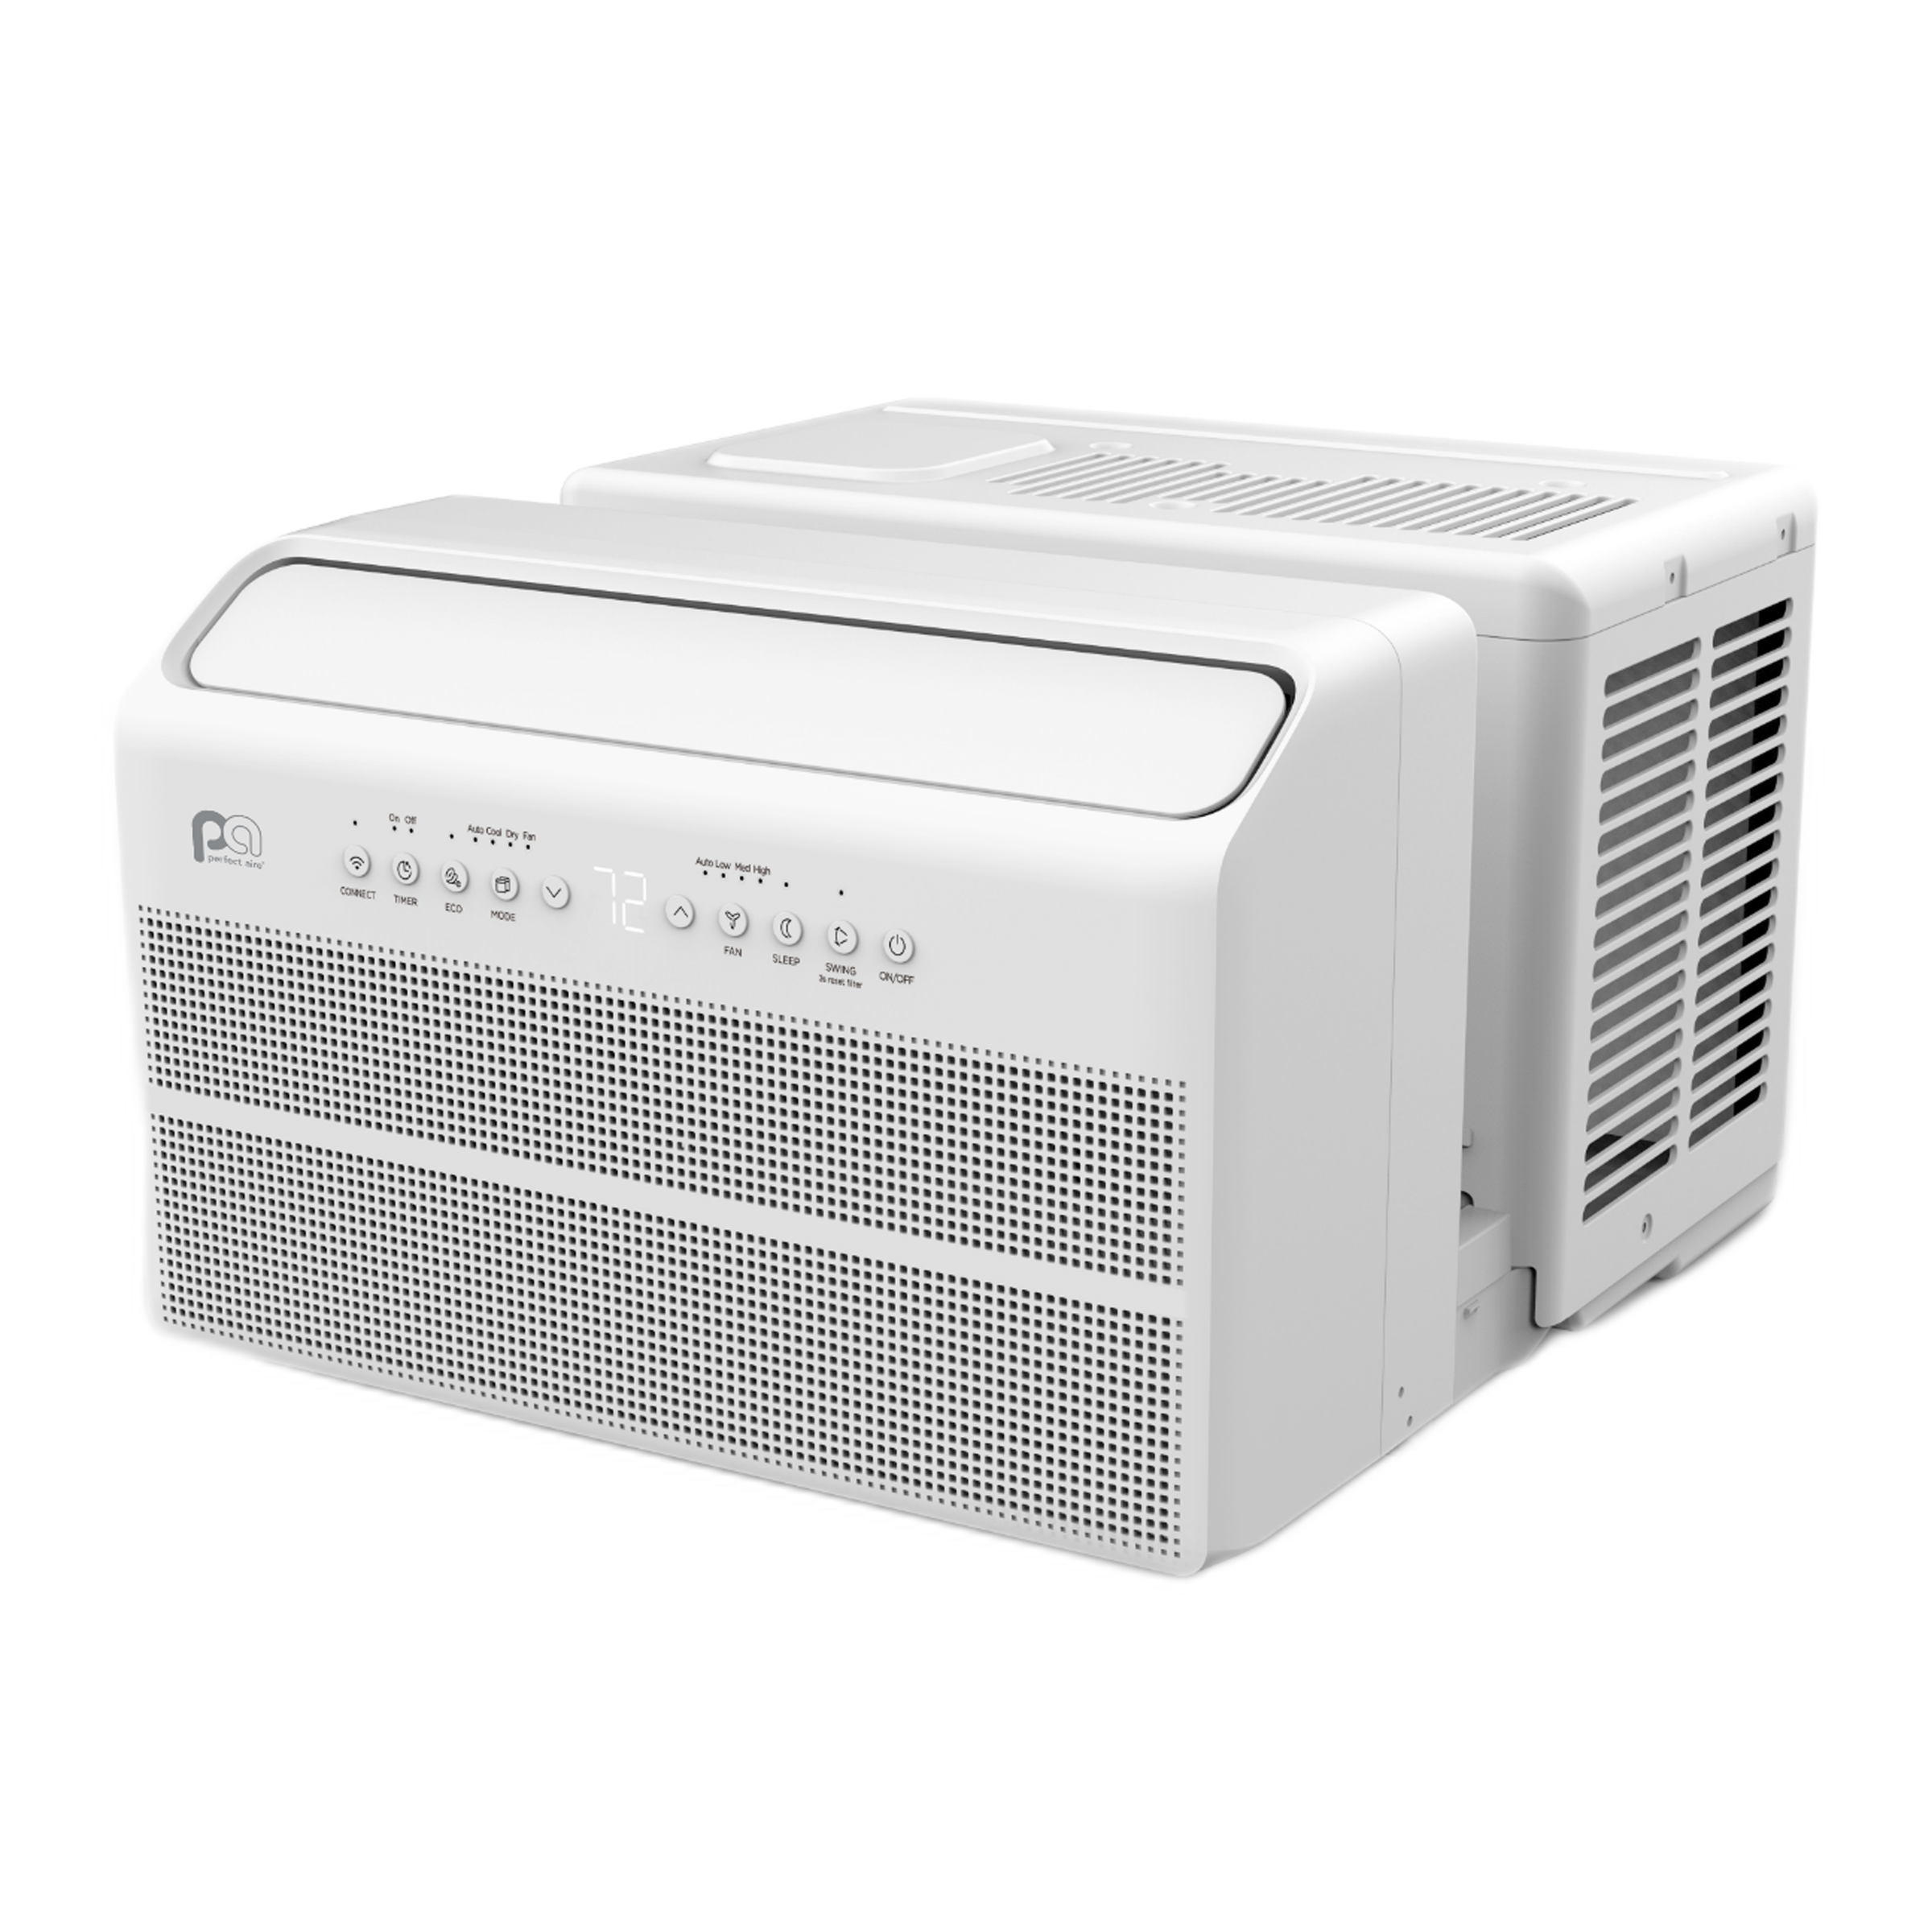 1PACU12000 Perfect Aire 12,000 BTU Energy Star U-Shaped Inverter Window Room Air Conditioner, Sq. ft: 550 Coverage with Wireless Smart Controls & Remote Control, R32 Refrigerant, 115V